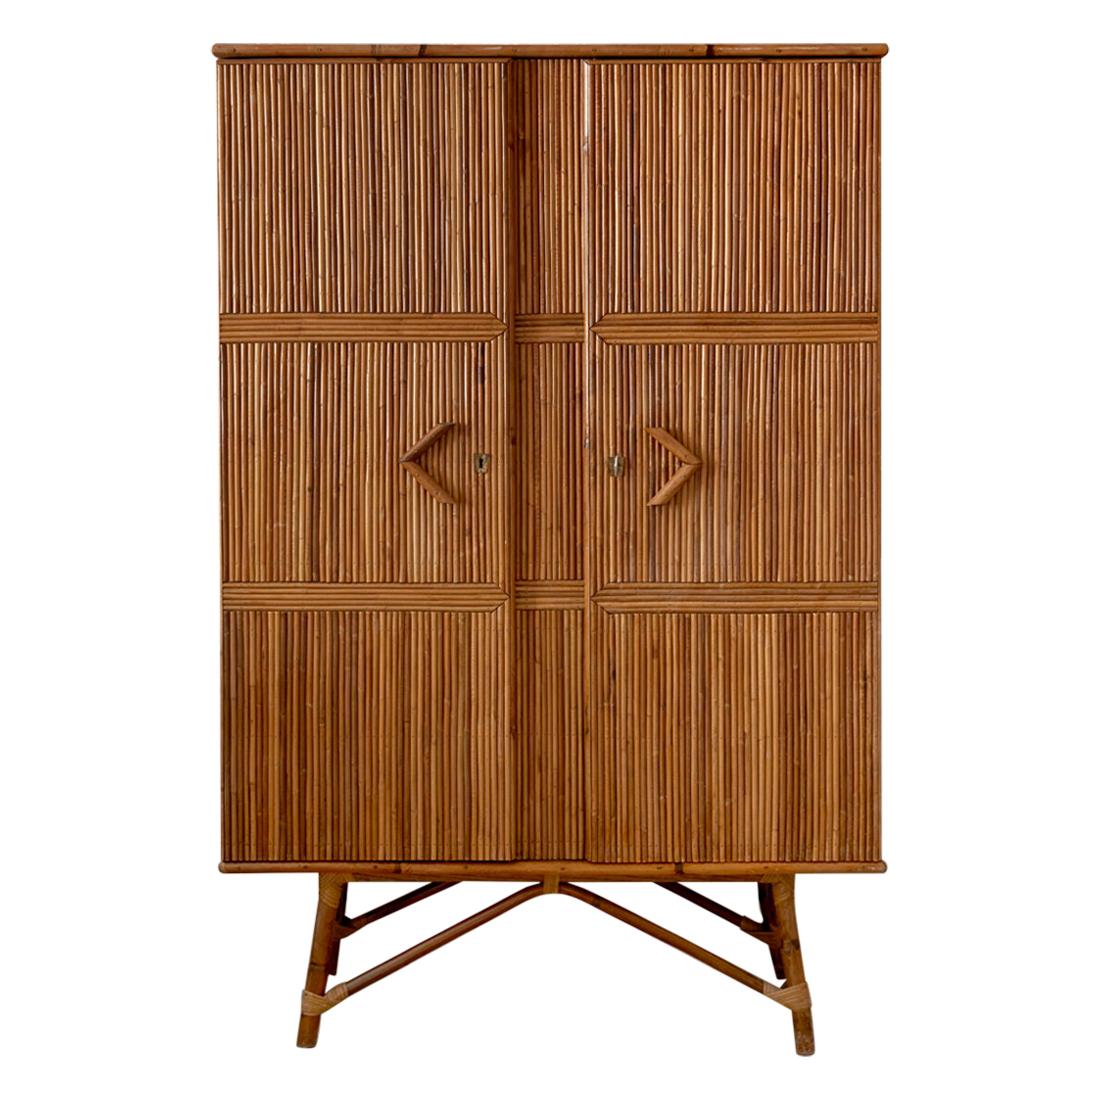 Vintage French Cabinet in Rattan with Shelves and Hangers, 1960s